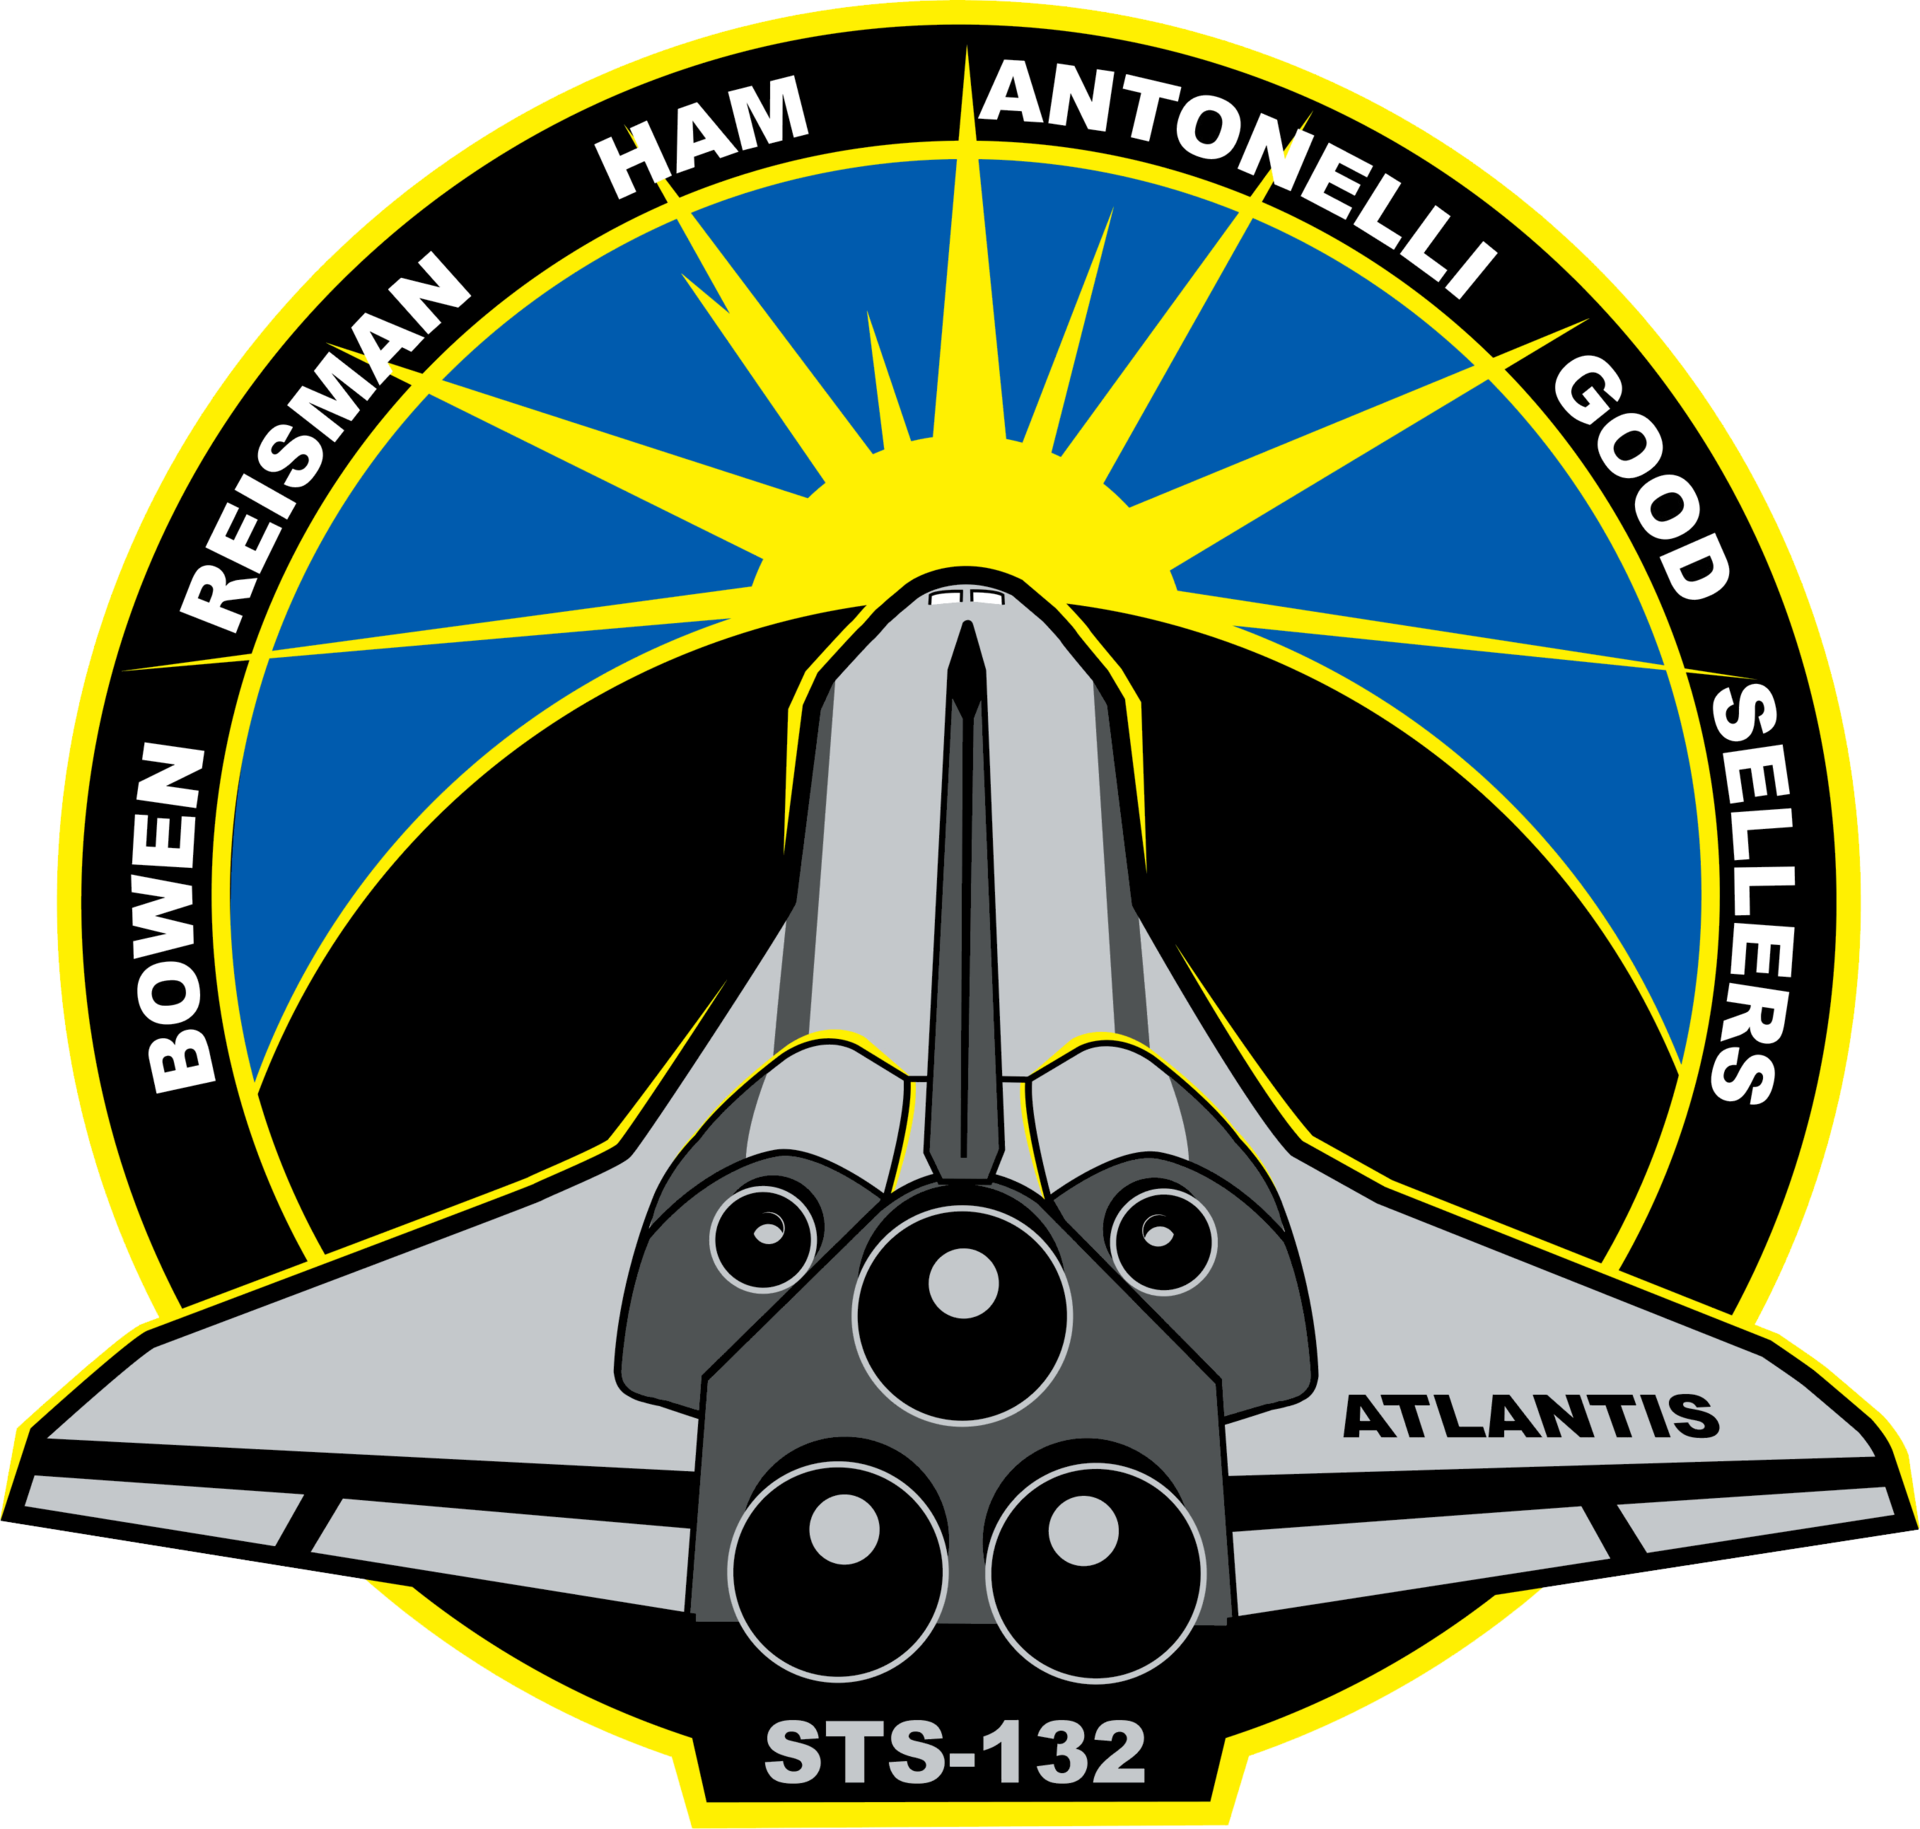 Mission patch for STS-132